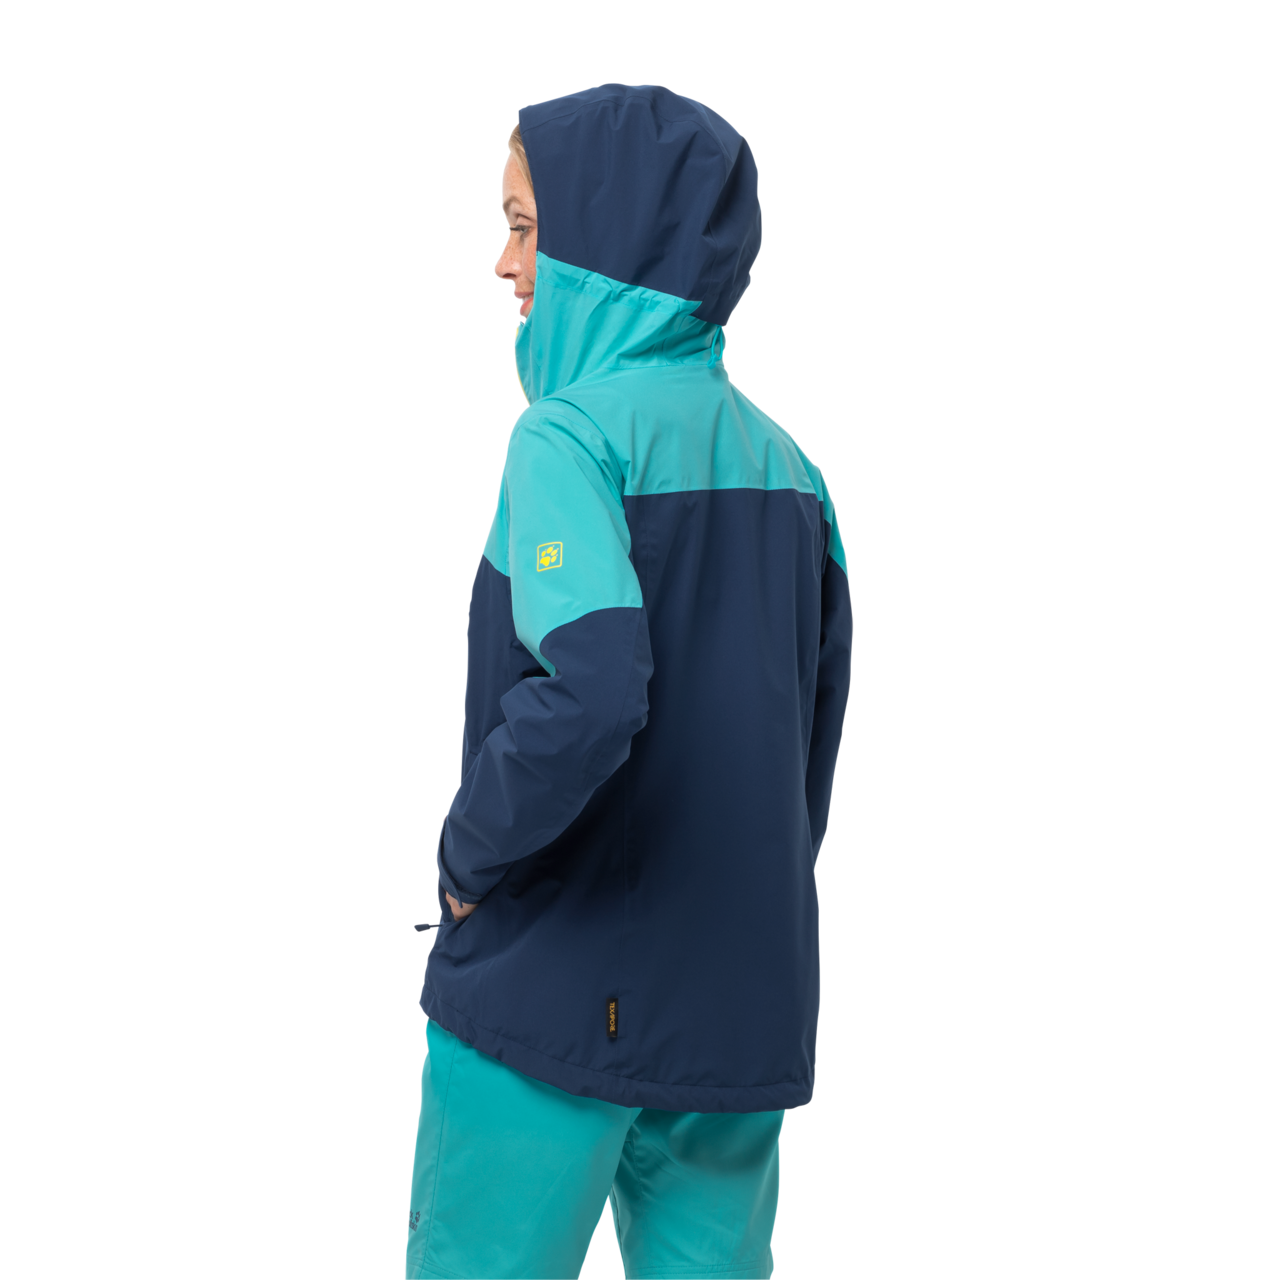 Jack Wolfskin Kids' Active Hike Jacket Review [Staff and Kid